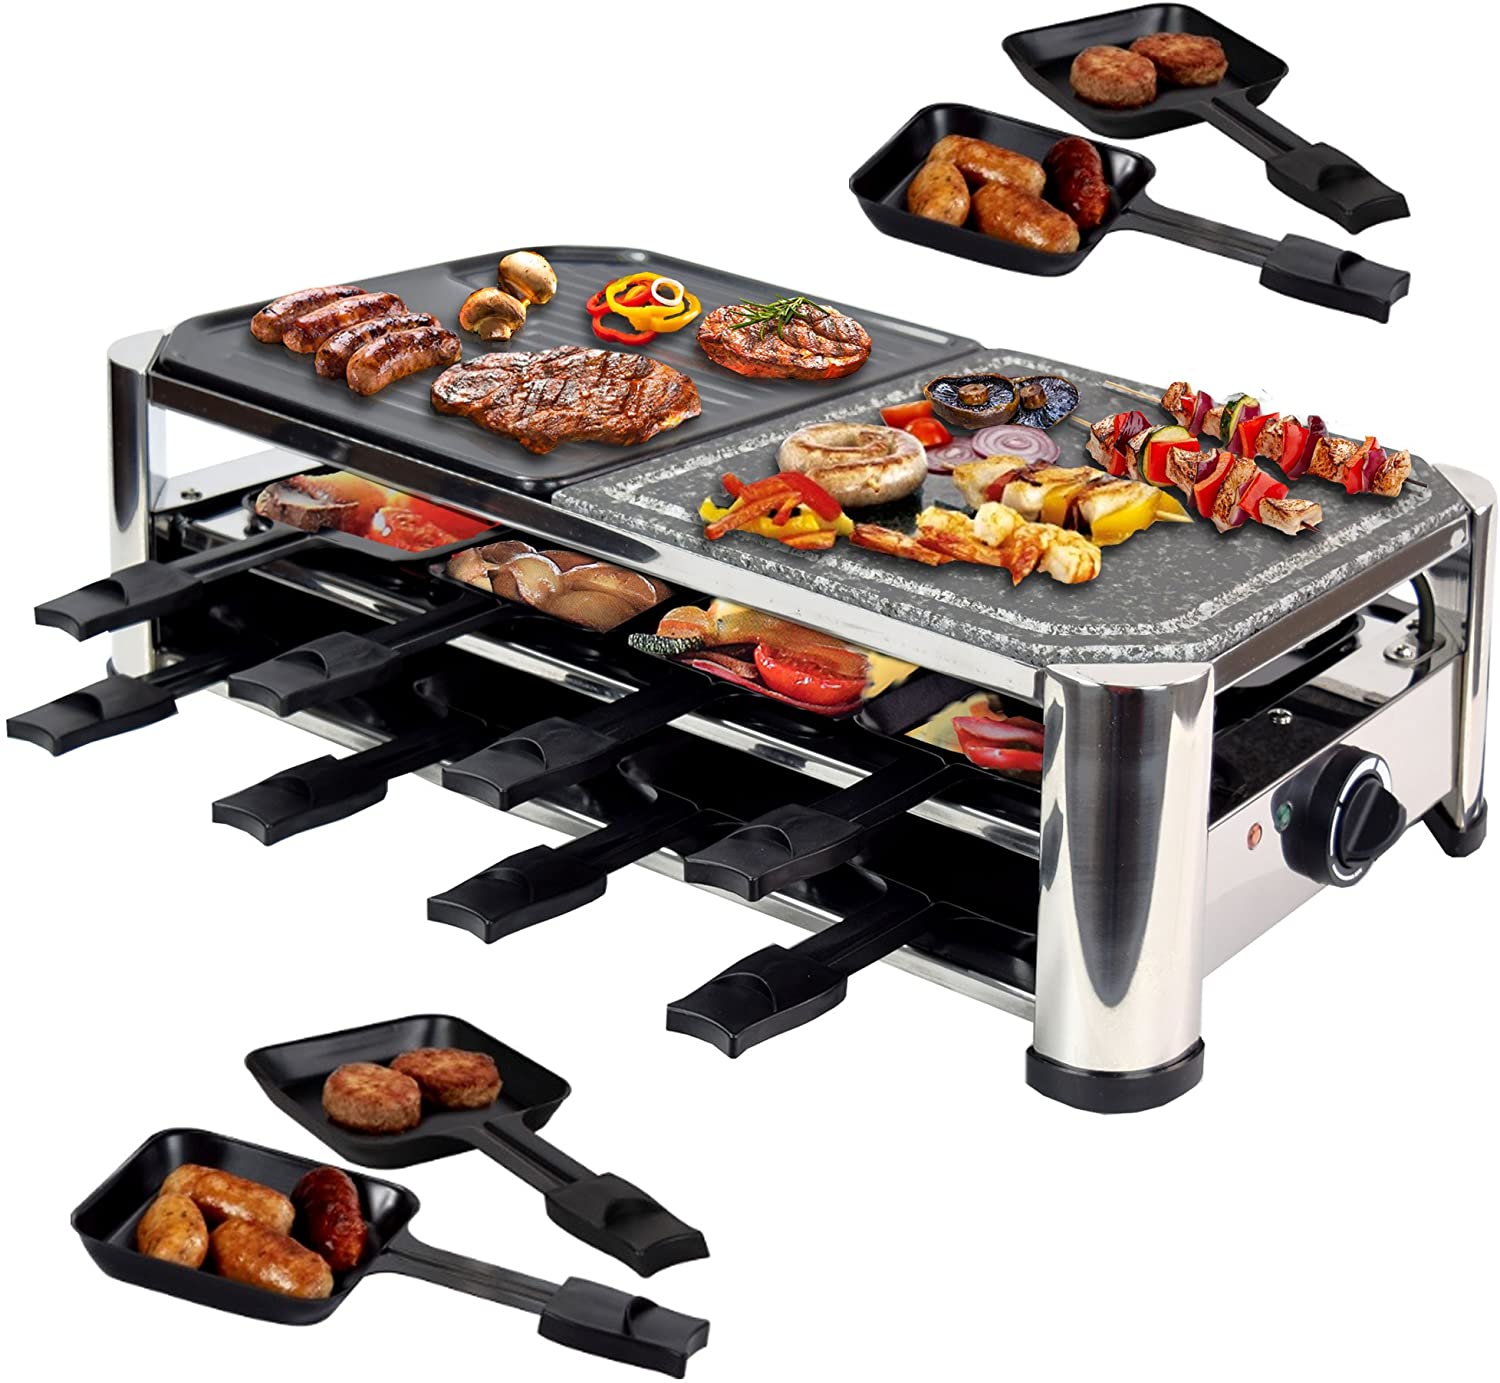 Syntrox Germany 16 Stainless Steel Raclette Pan with Grill and Hot Stone